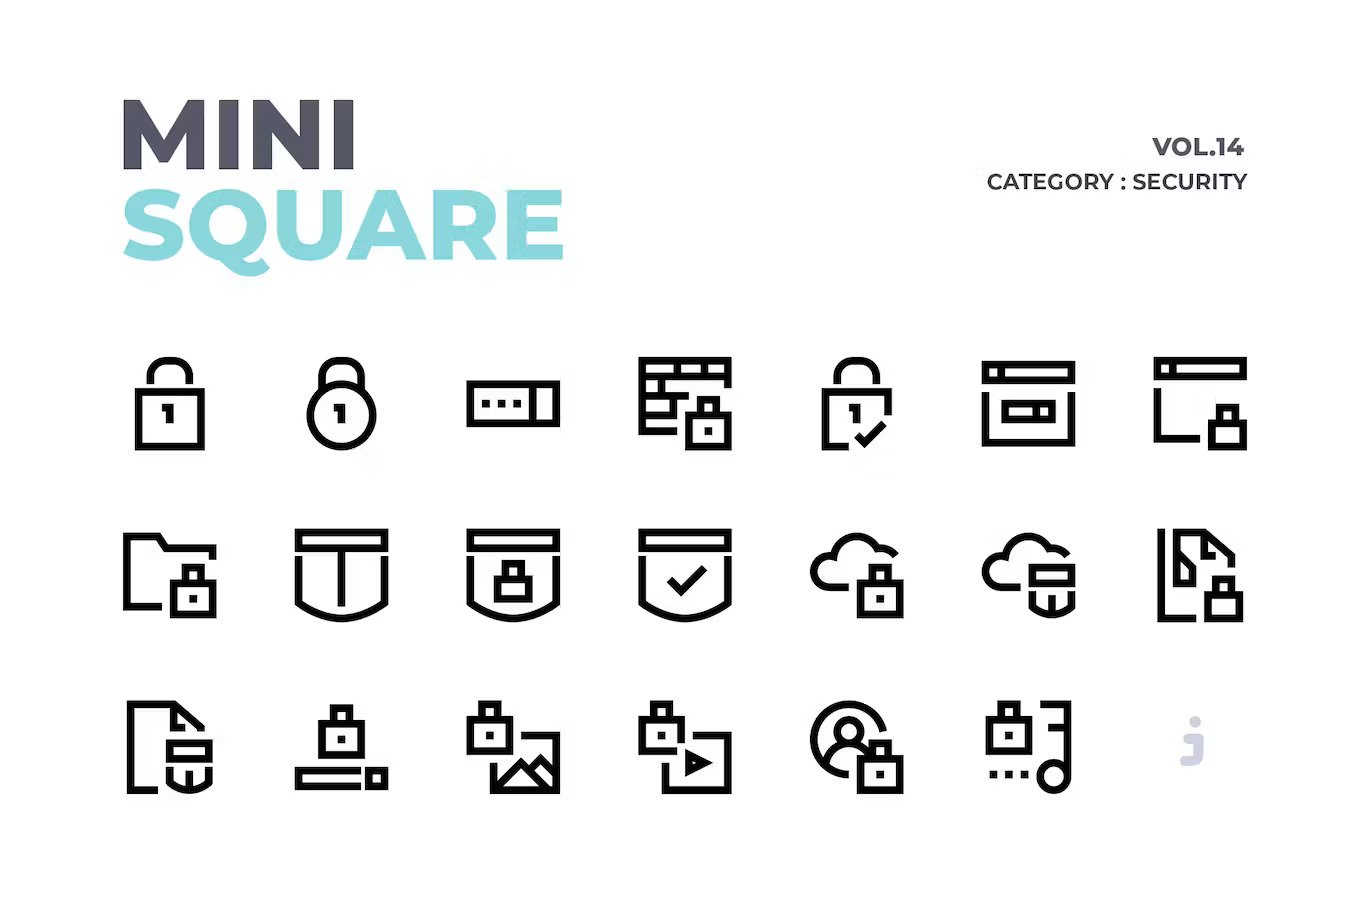 A mini sqaure security icon set